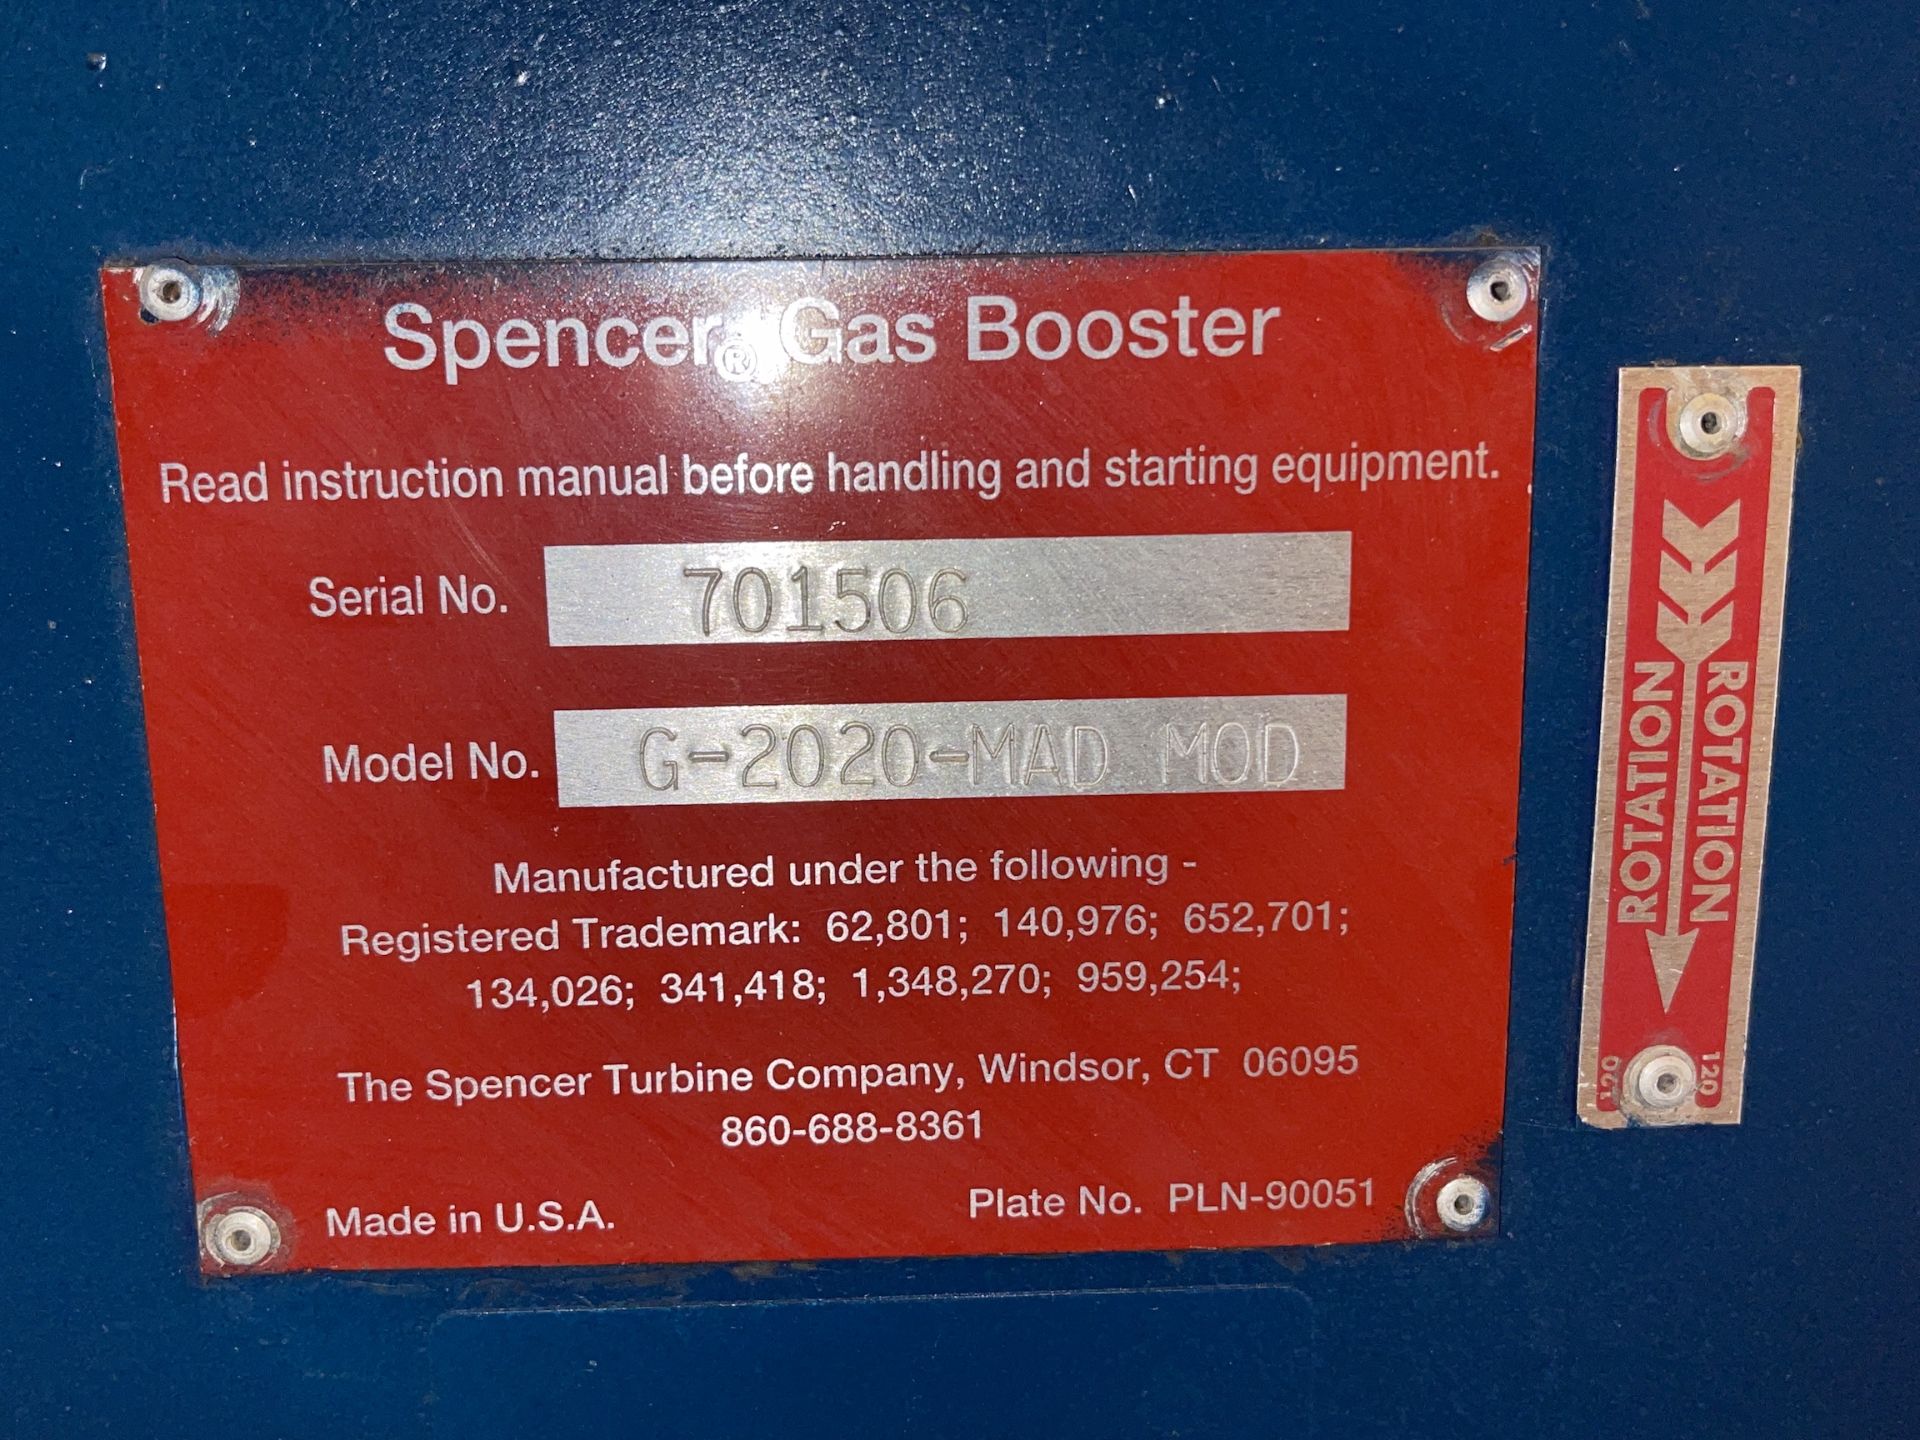 Spencer Gas Booster (DR132) - Lester, PA - Image 6 of 9